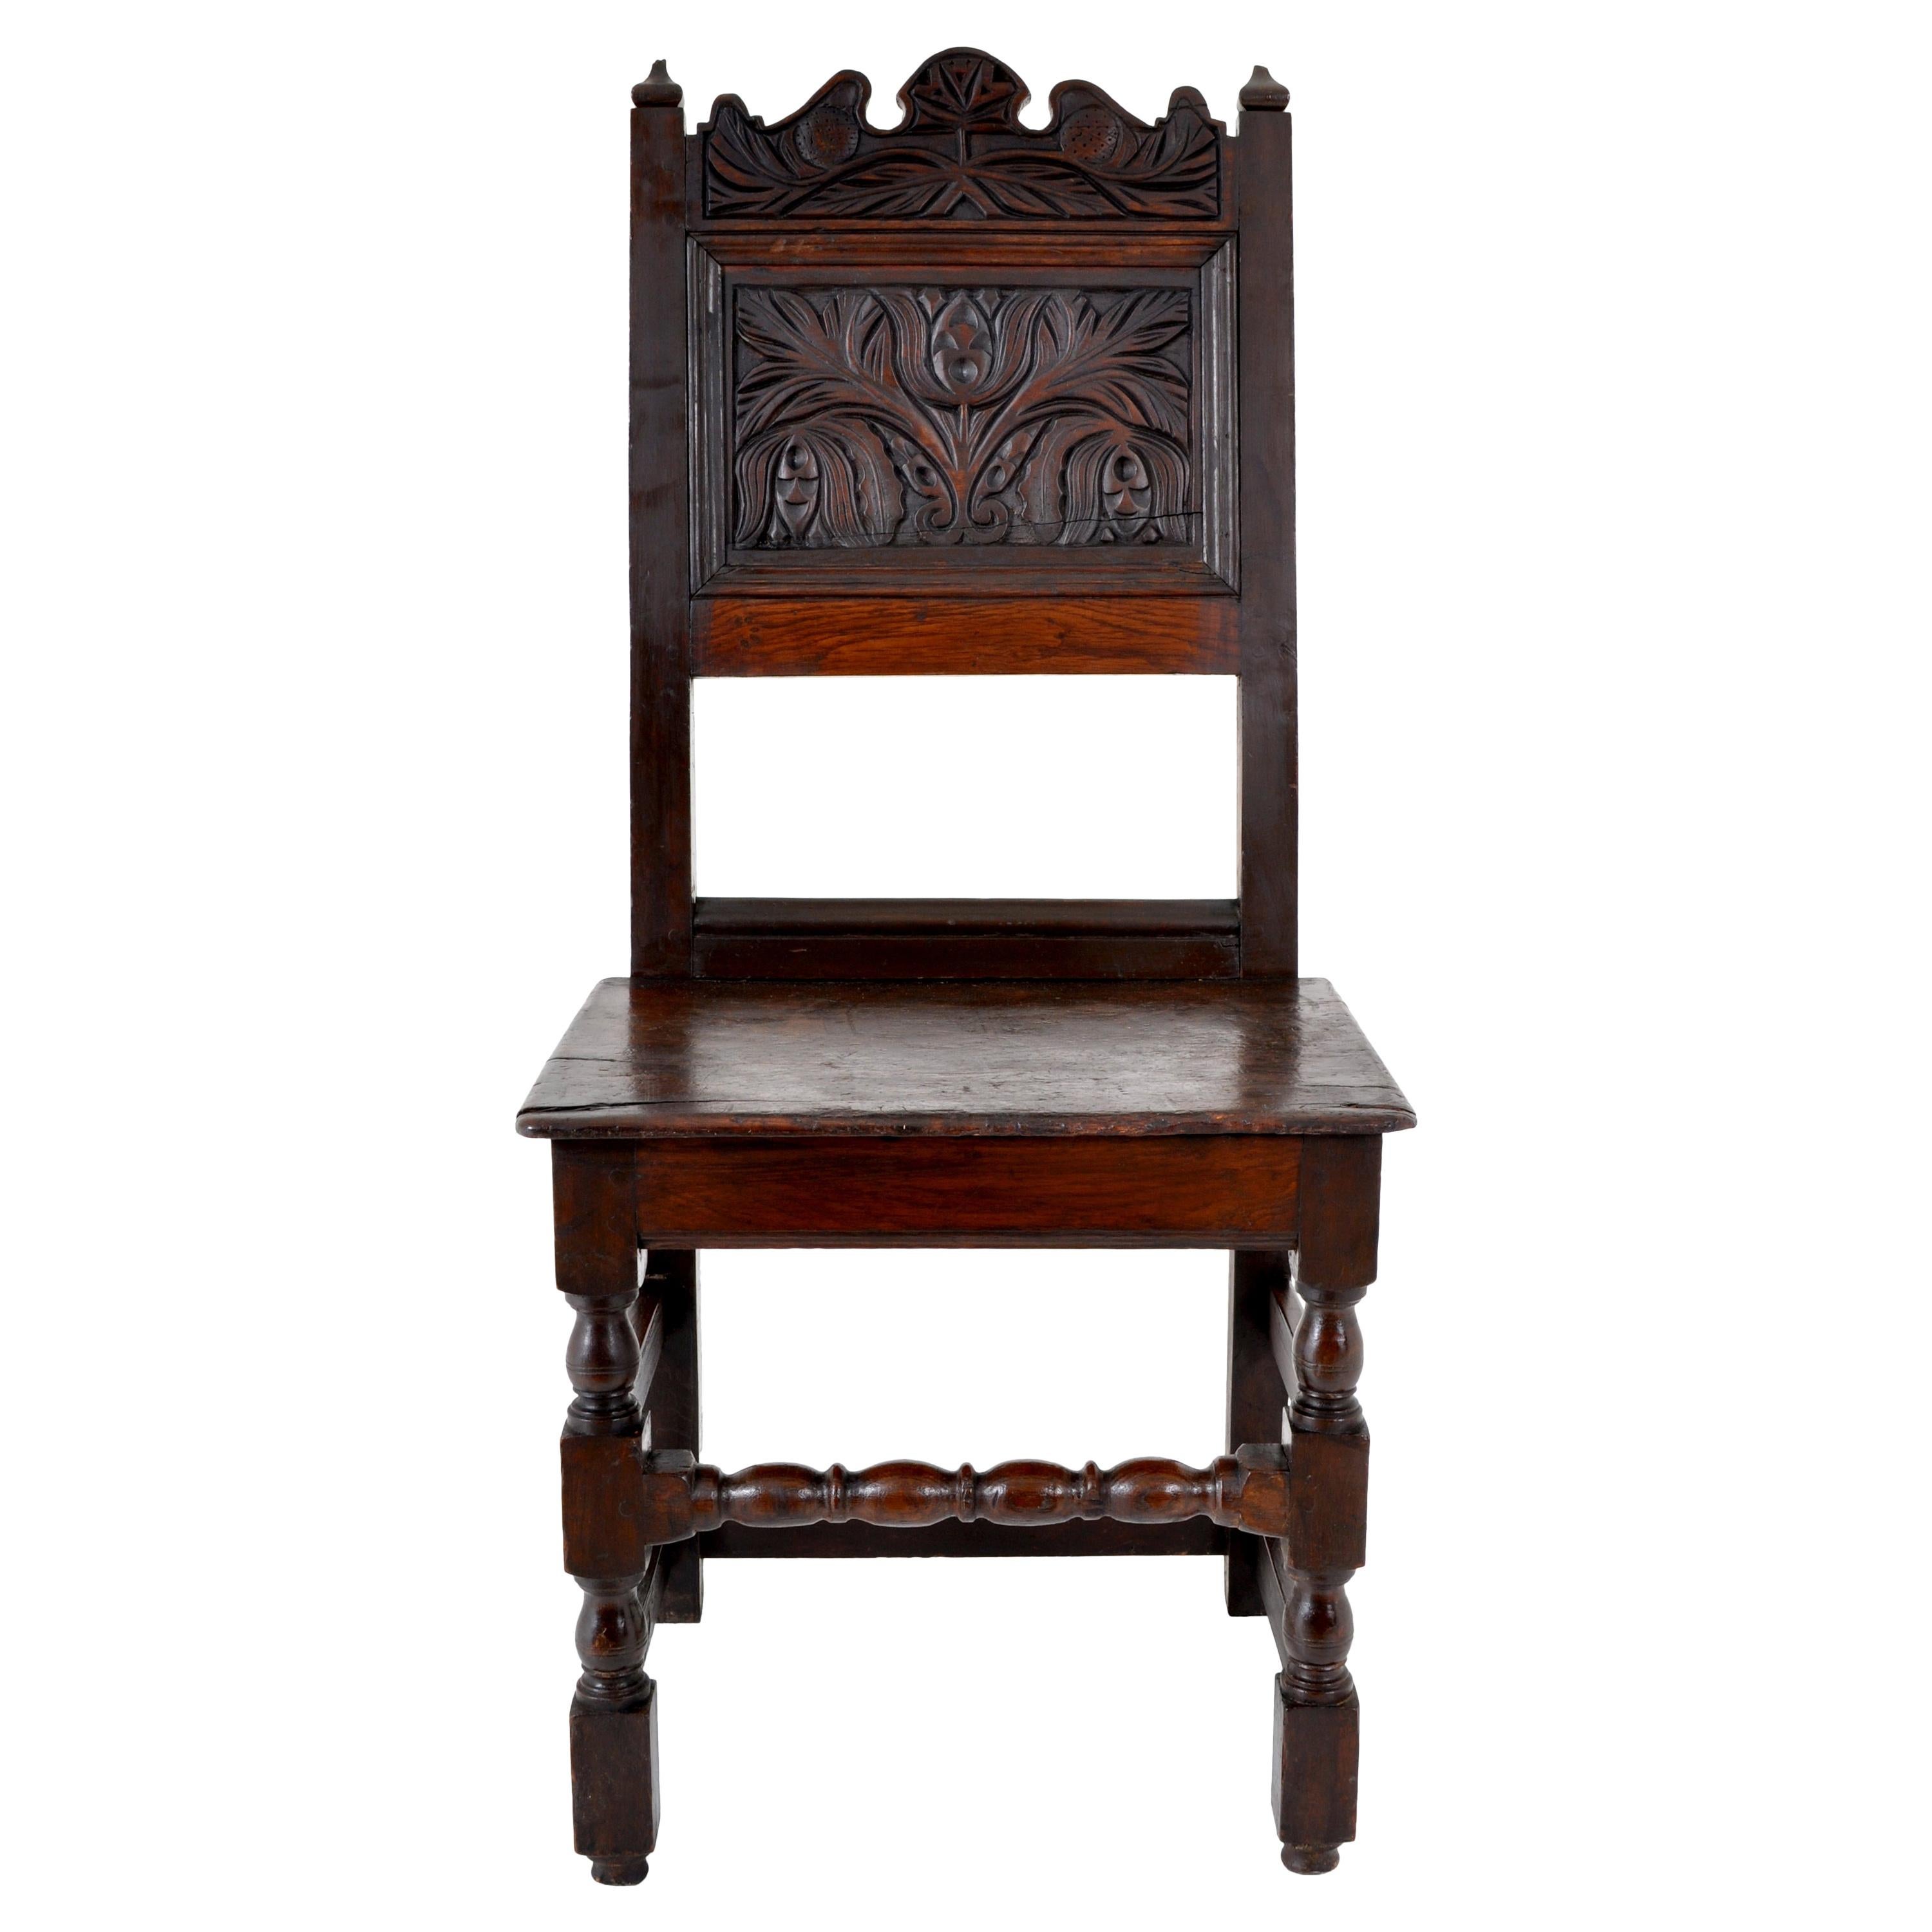 Antique English 17th Century Jacobean Carved Oak Joined Chair, circa 1640